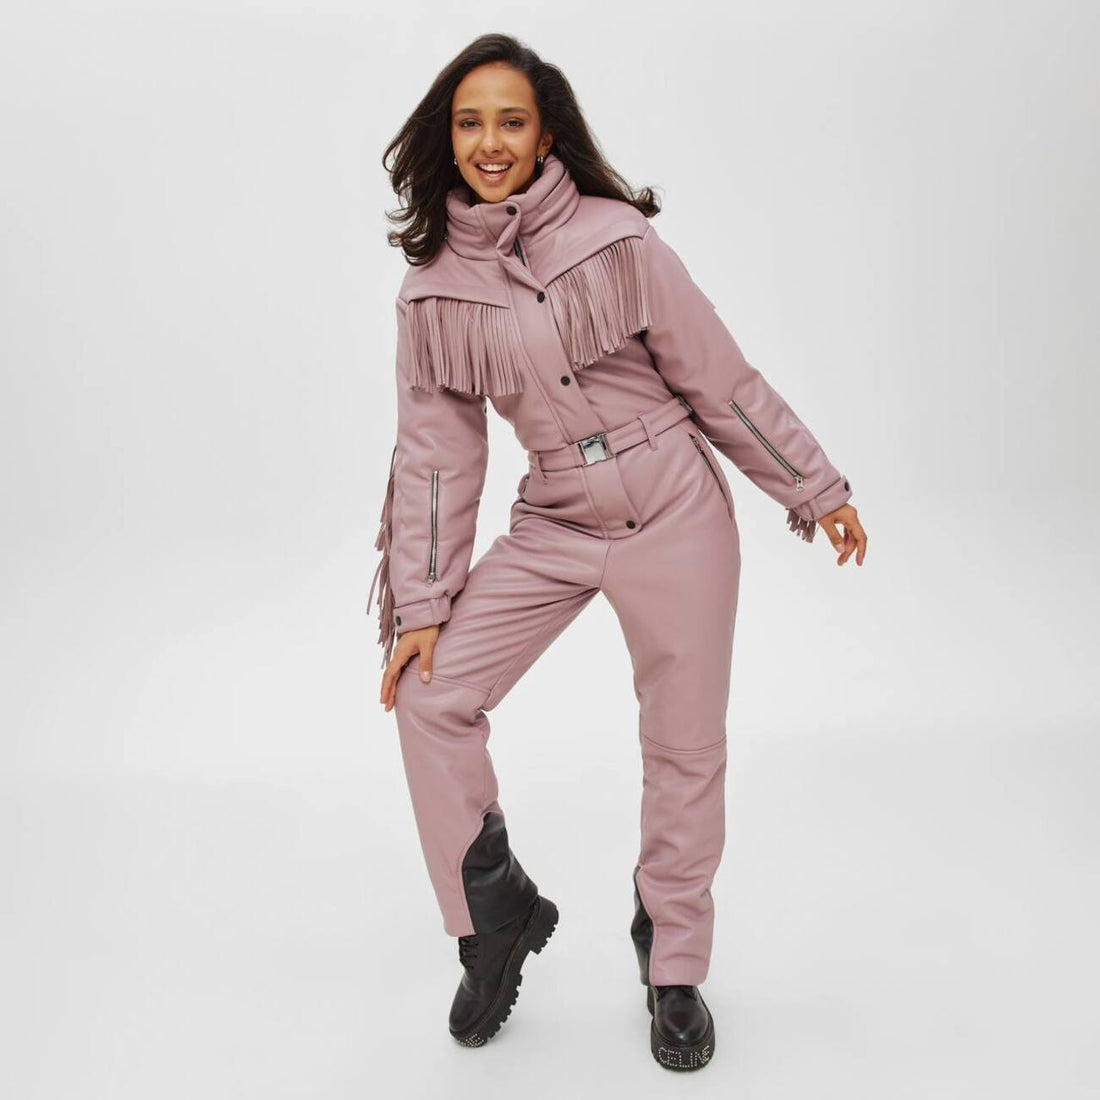 Chic ski outfit snowsuit for ladies - BONA - DUSTY PINK - Ski wear winter for women